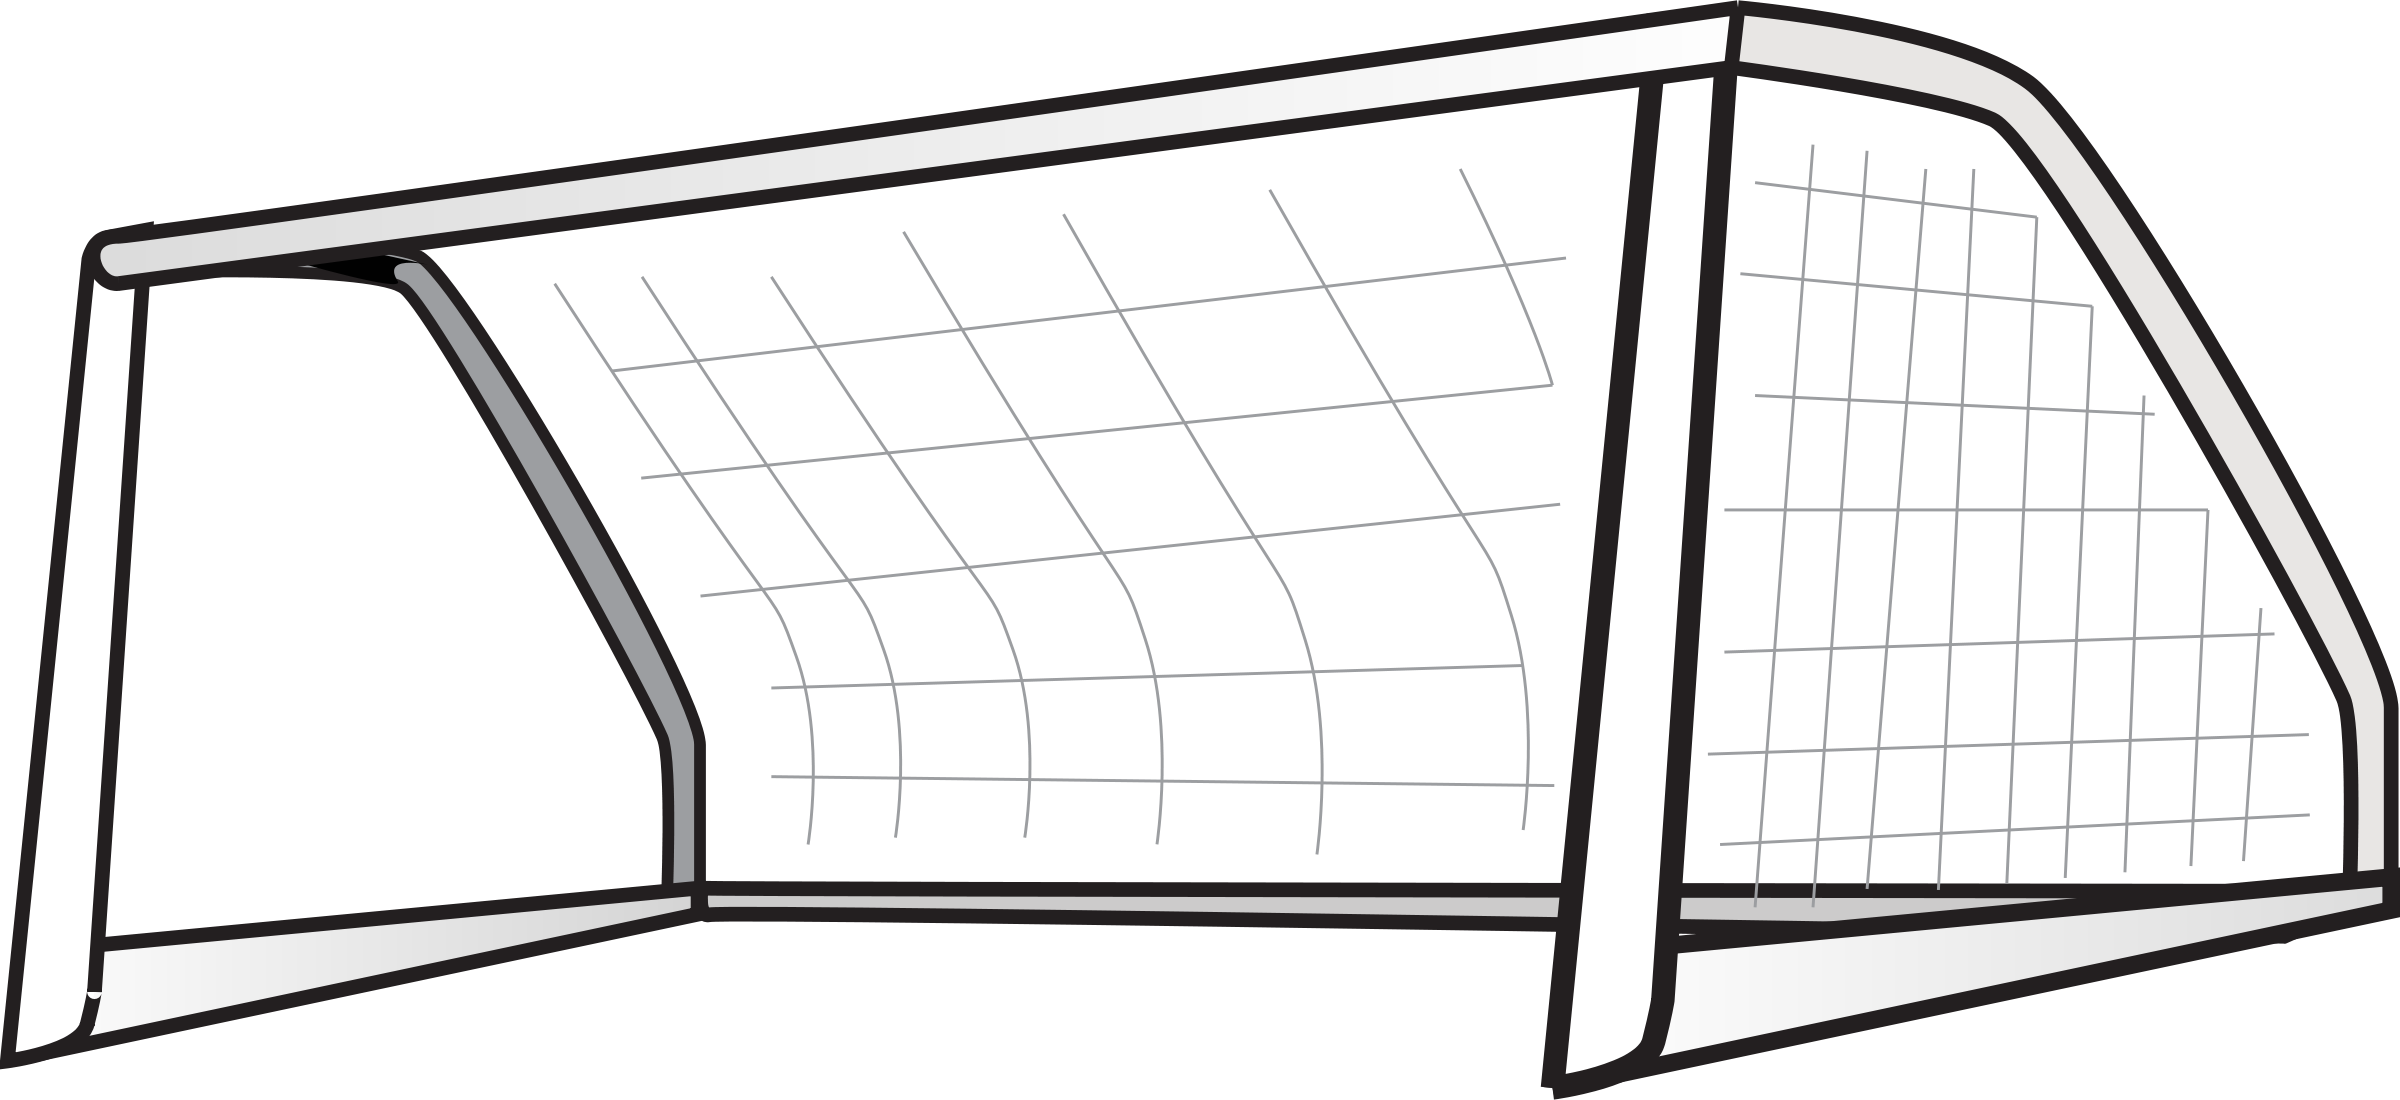 Clip Arts Related To - Soccer Goal Clipart (2400x1100)